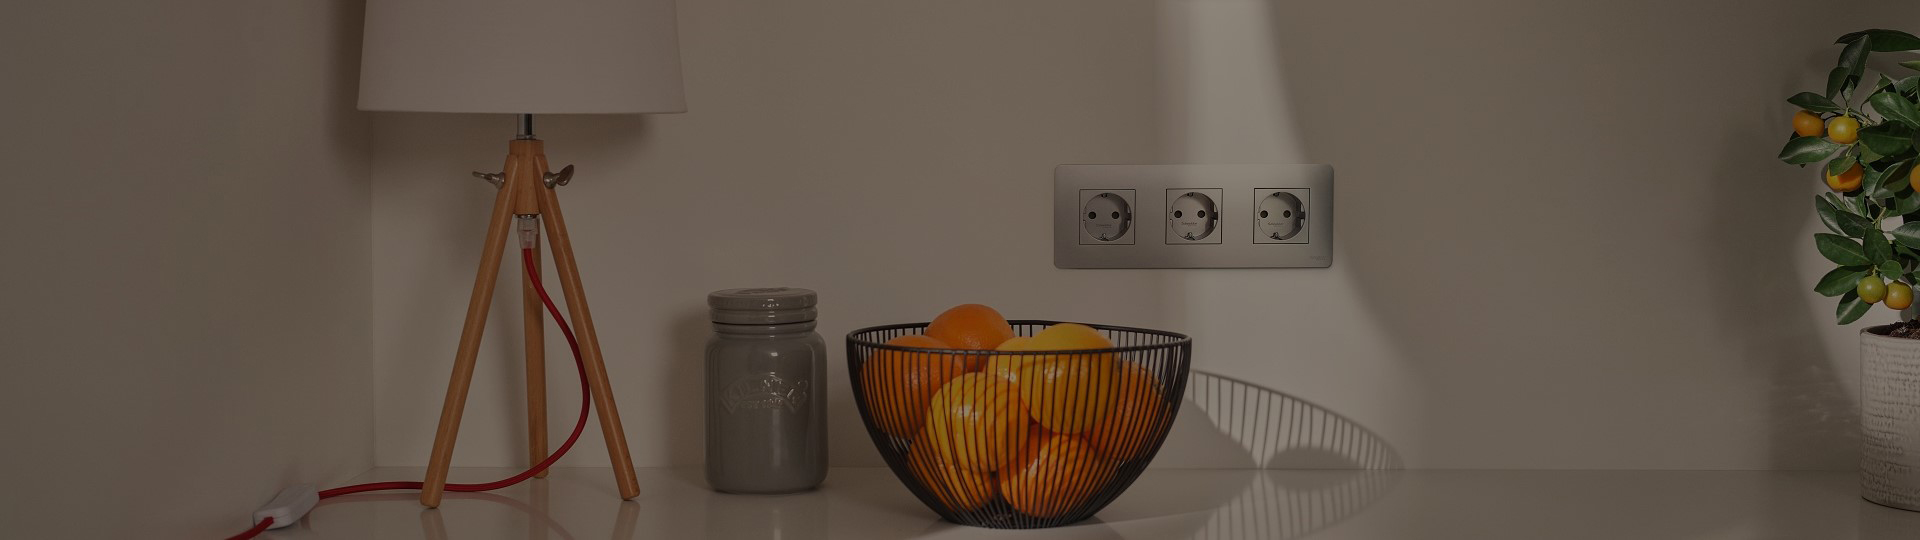 Basket of Oranges with table lamp and three sockets on wall